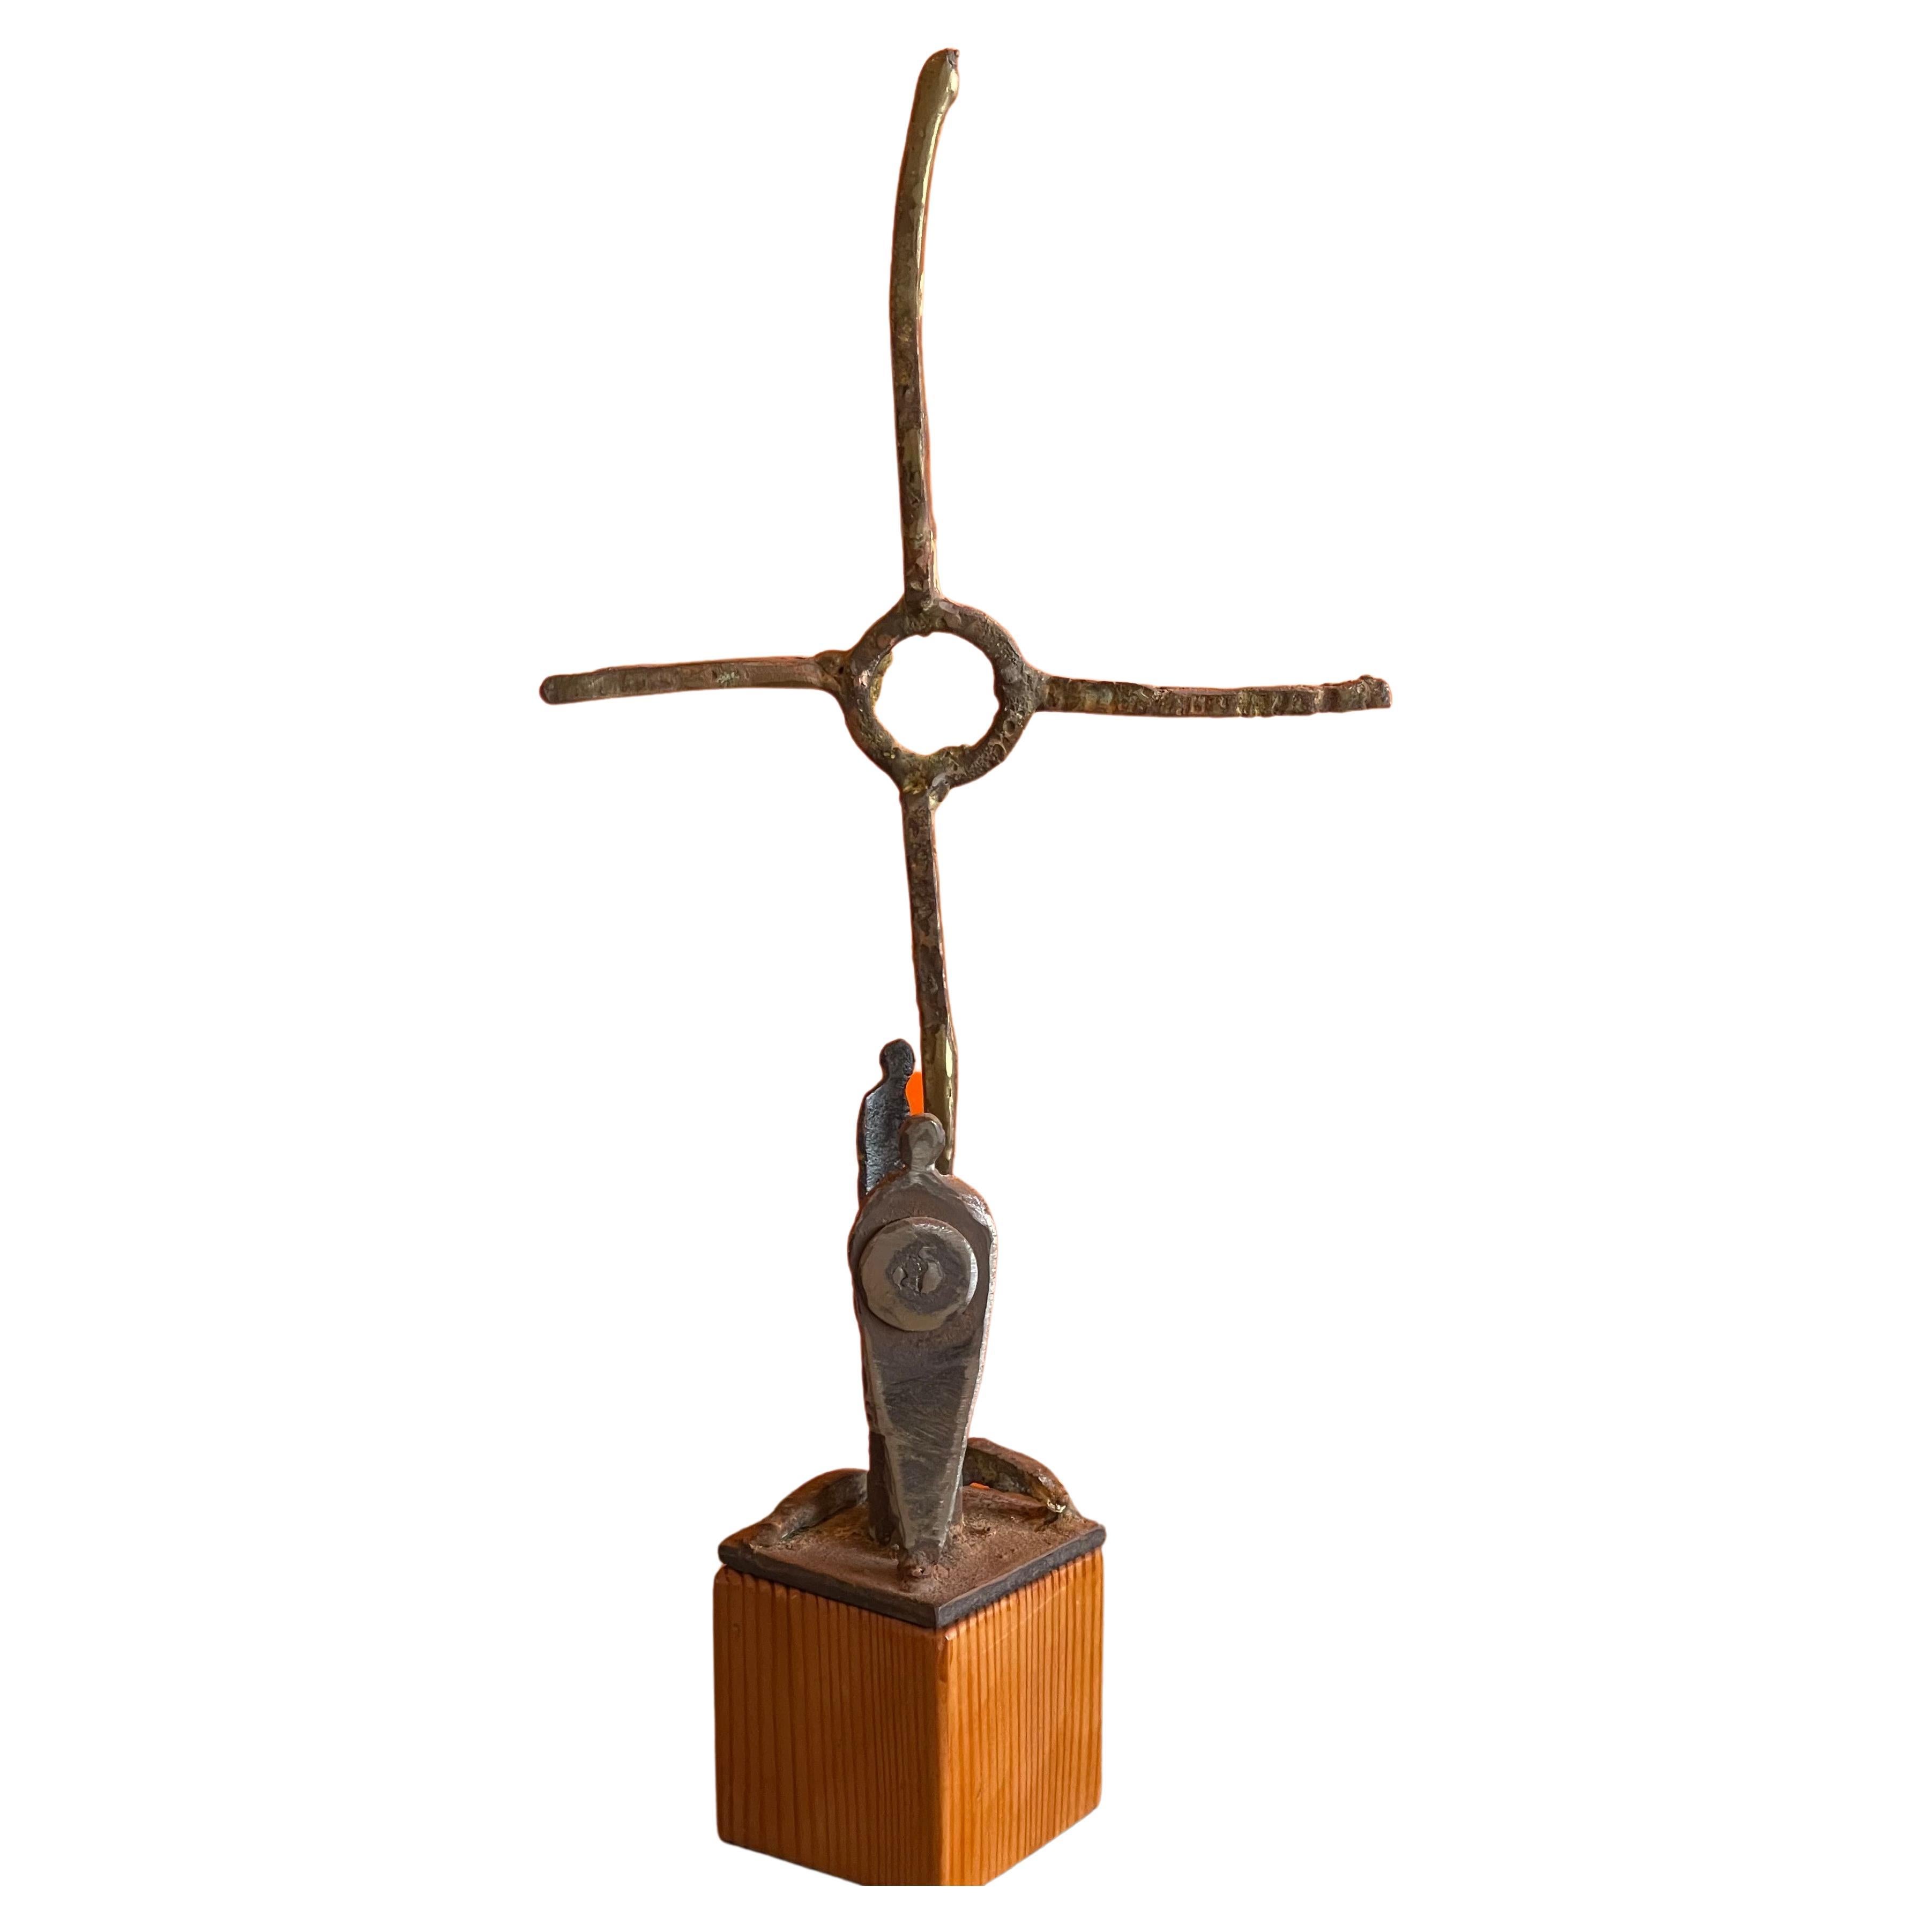 Patinated bronze cross sculpture on wood base by listed artist Greg Bressani, circa 2018. The piece has a wonderful patina and measures 7